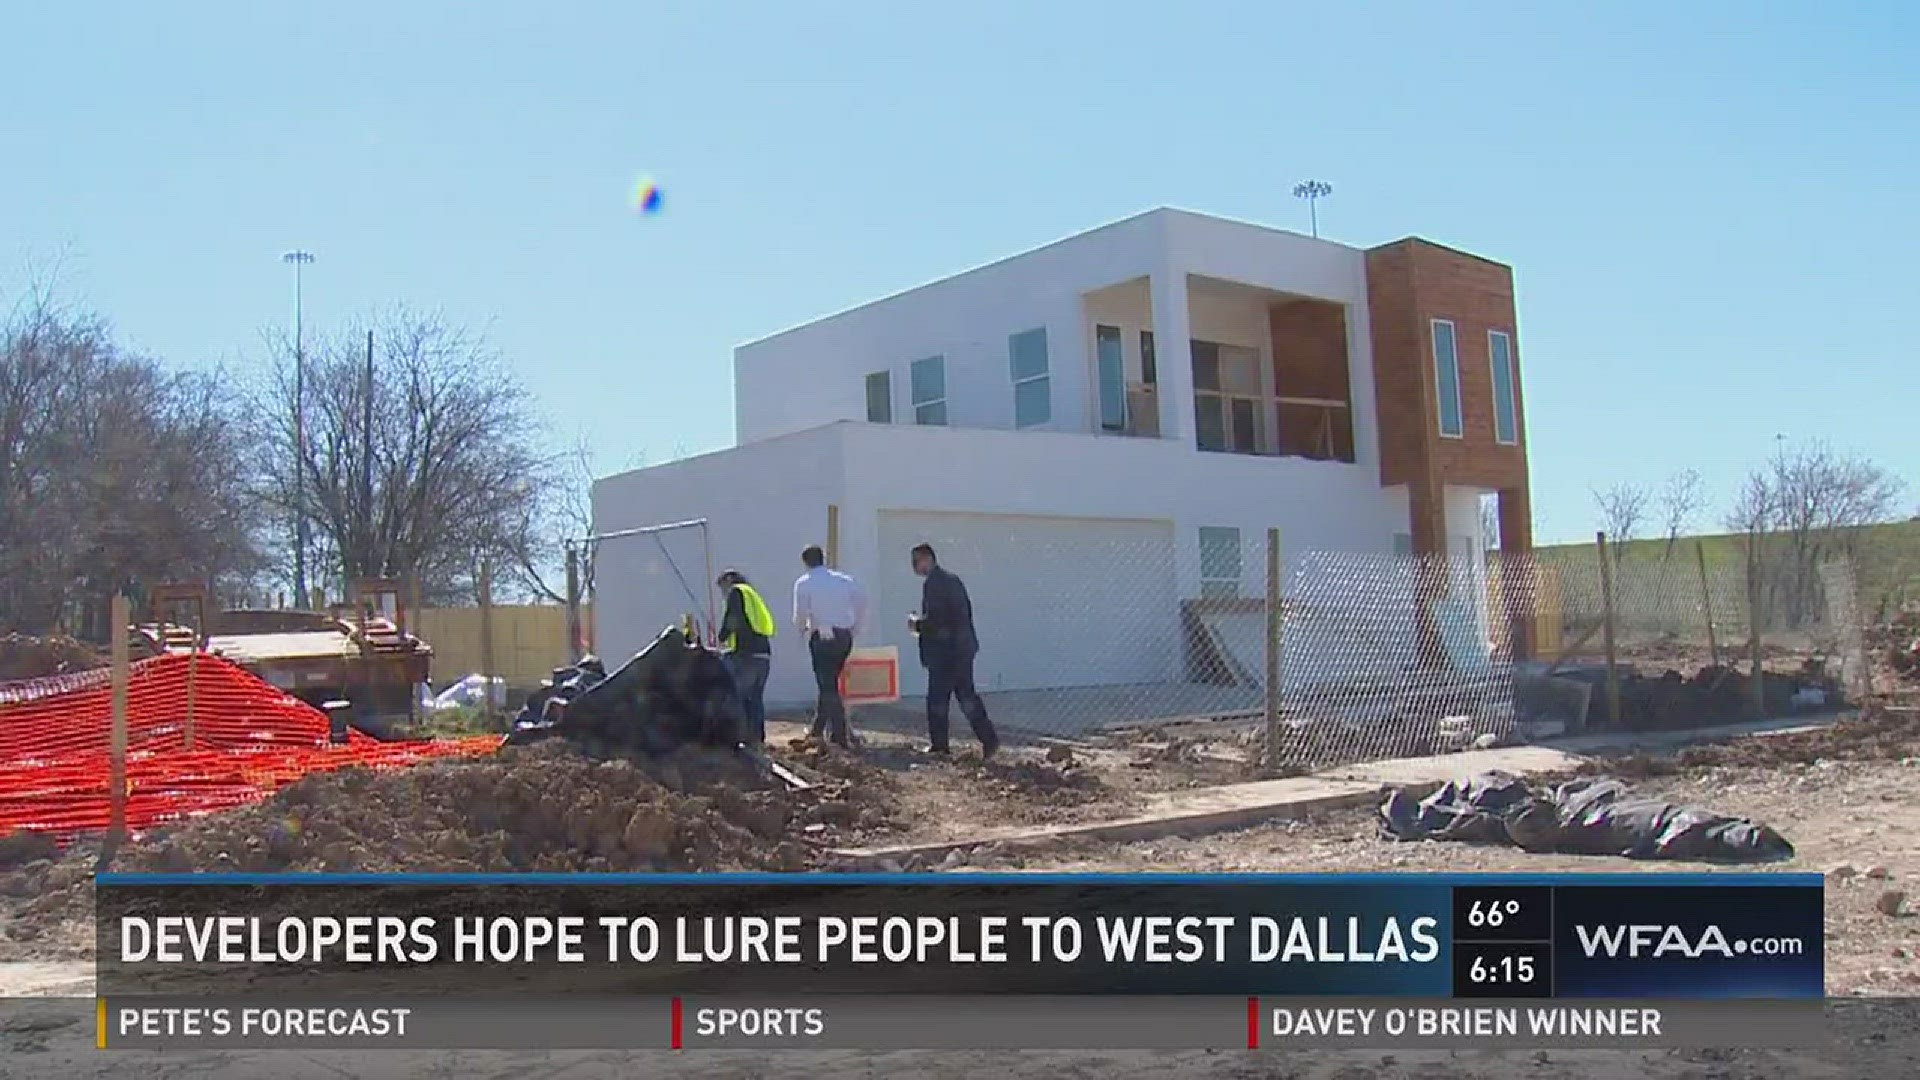 The Margaret Hunt Hill Bridge sparked a revival for West Dallas business. New and affordable housing has followed.